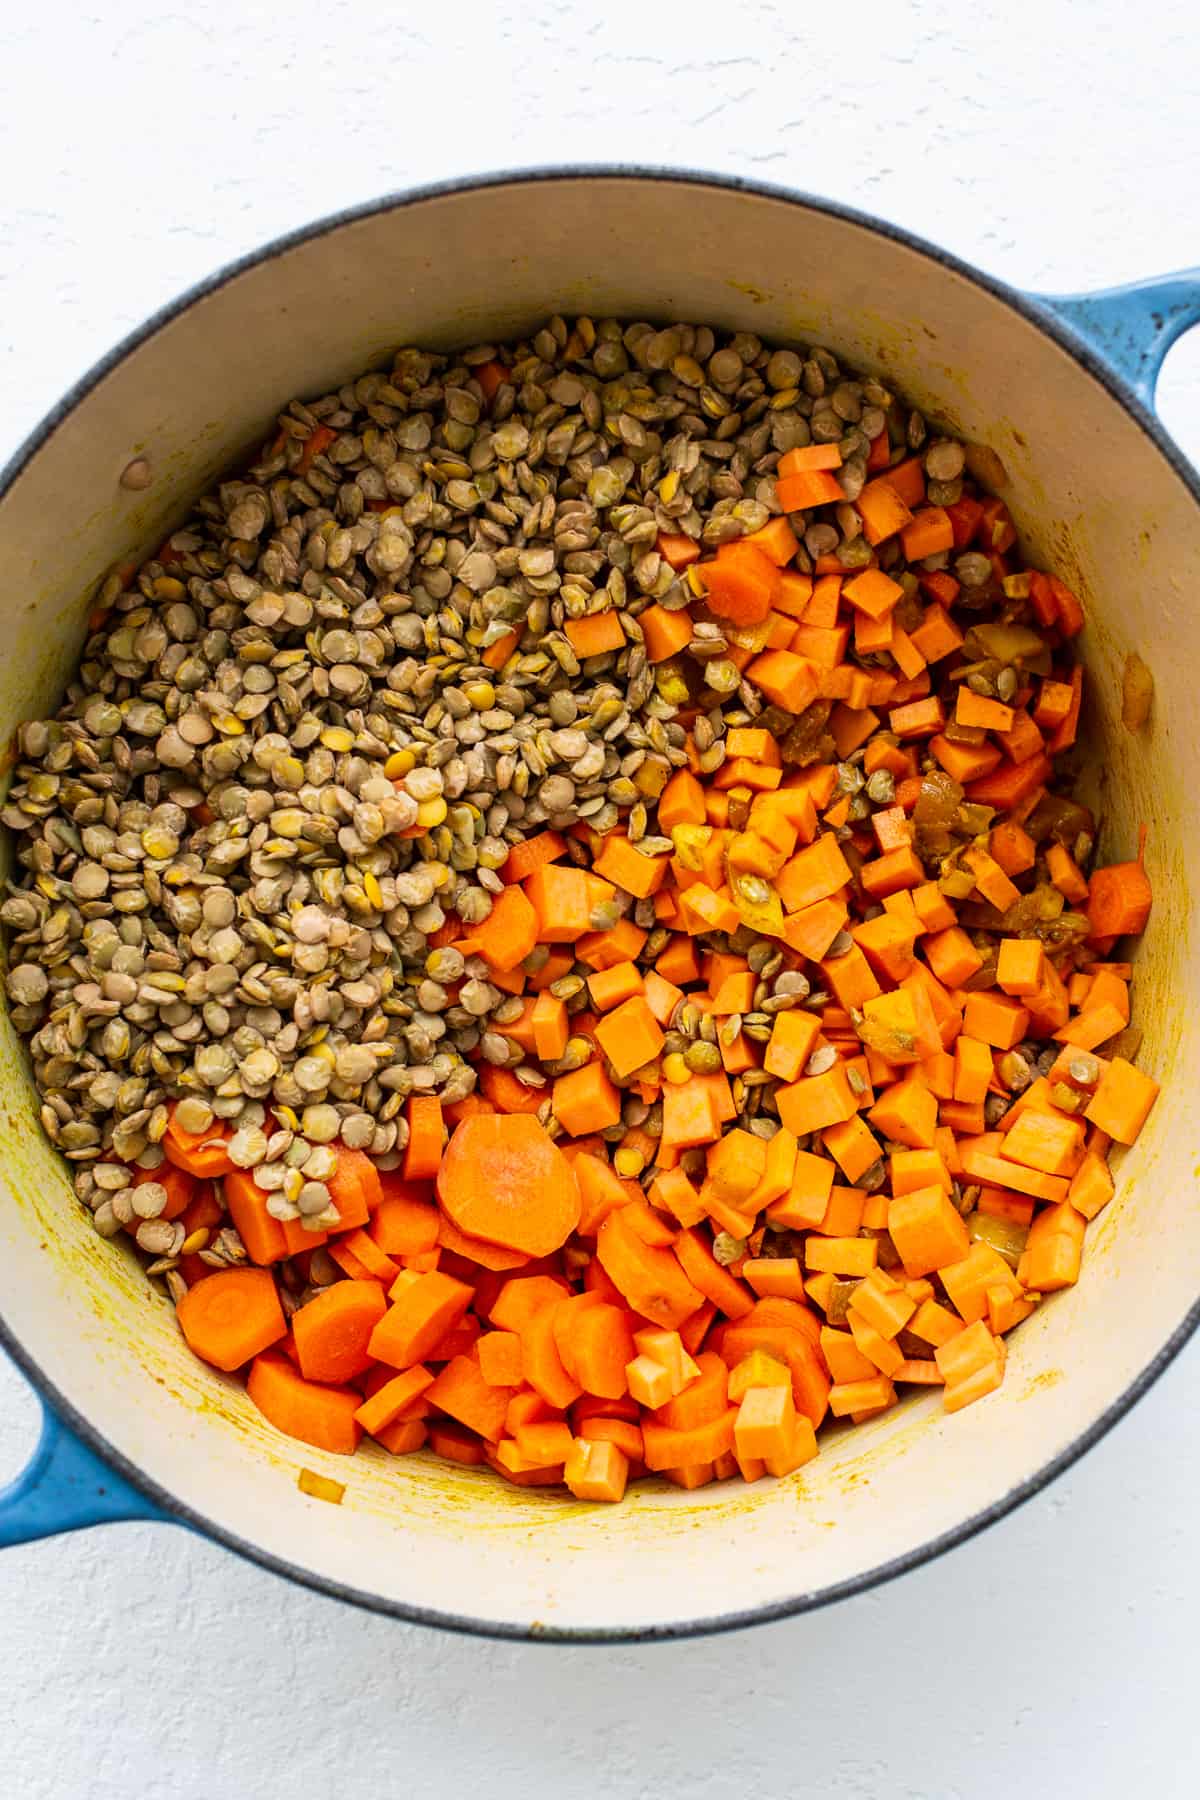 Diced sweet potatoes and lentils in a dutch oven.